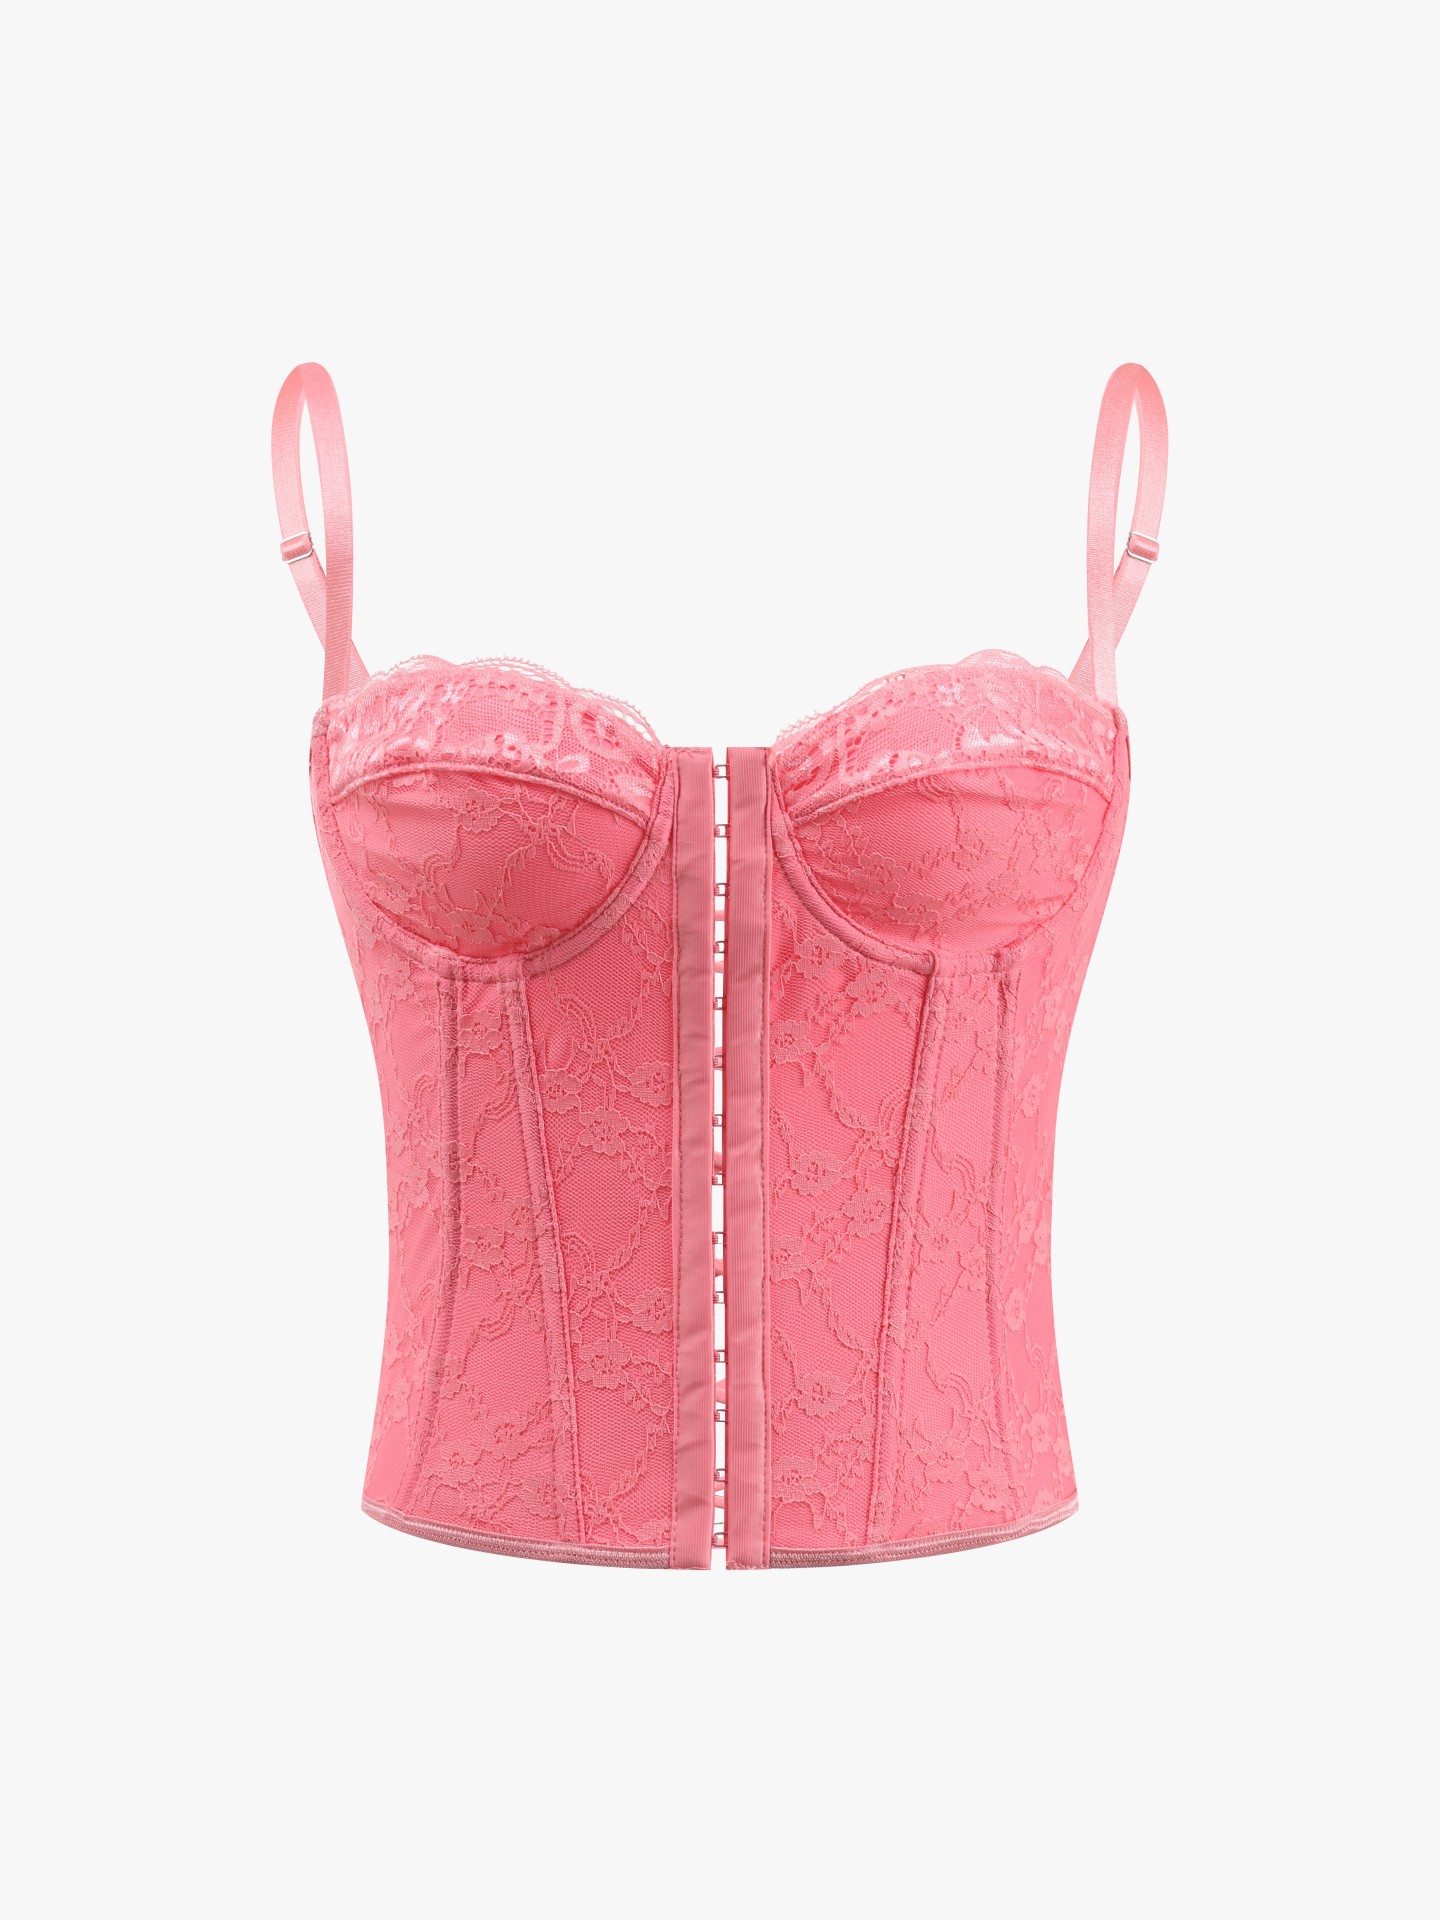 Lace Corset Top Pink